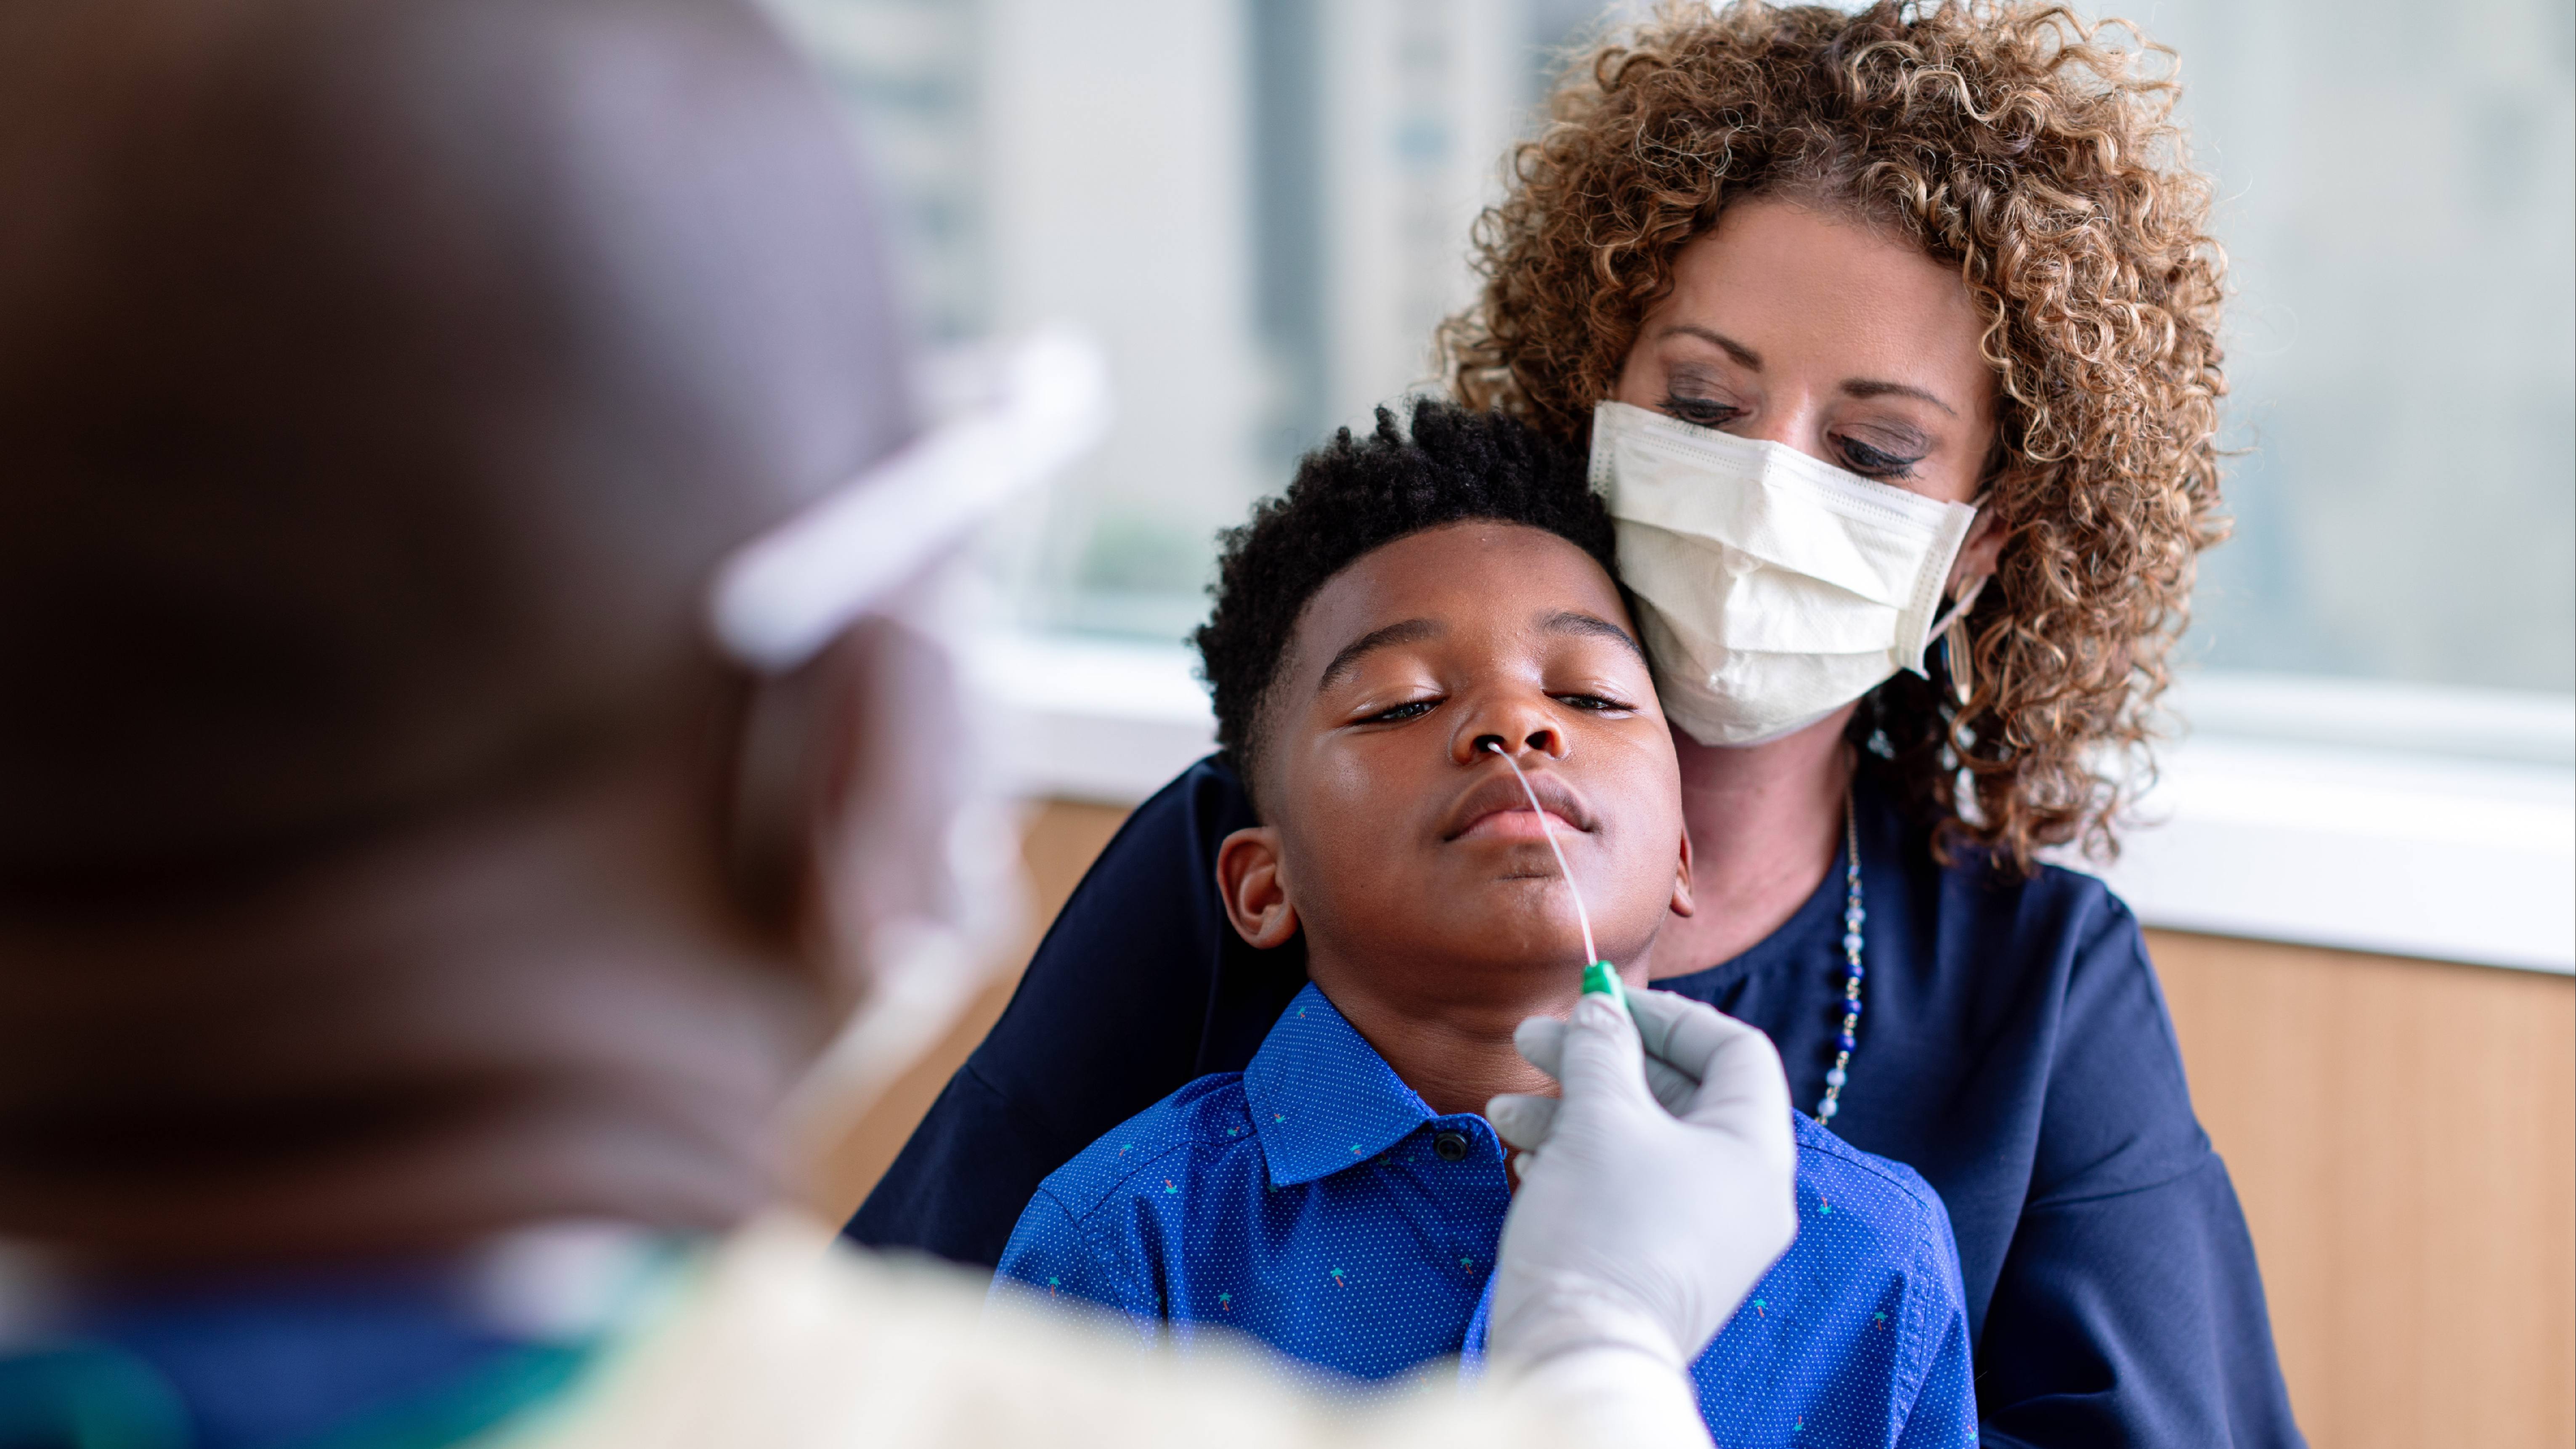 a white woman in hospital uniform and wearing a face mask, holding a young Black boy while a Mayo Clinic medical staff person performs a nasal COVID-19 on the child